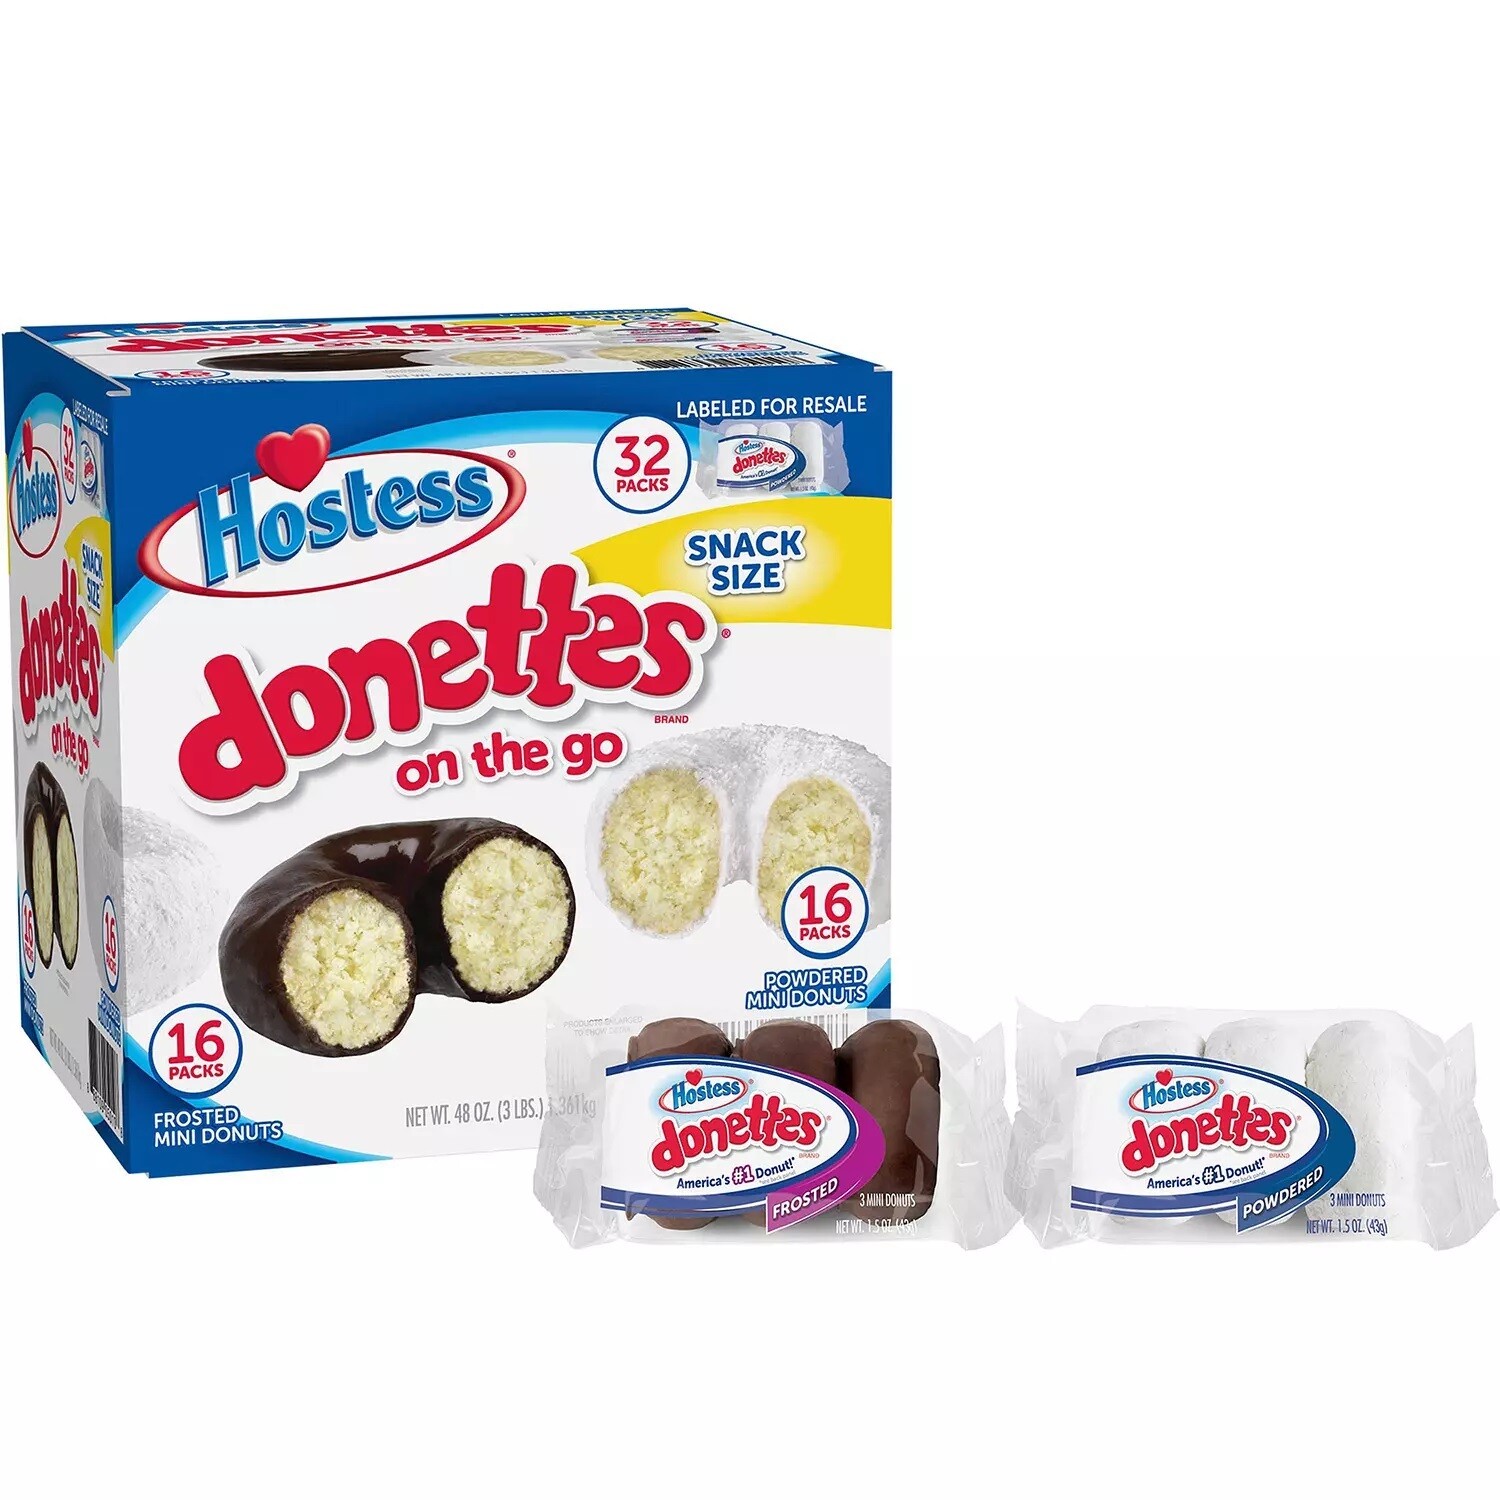 Hostess - Donettes on the Go 32ct